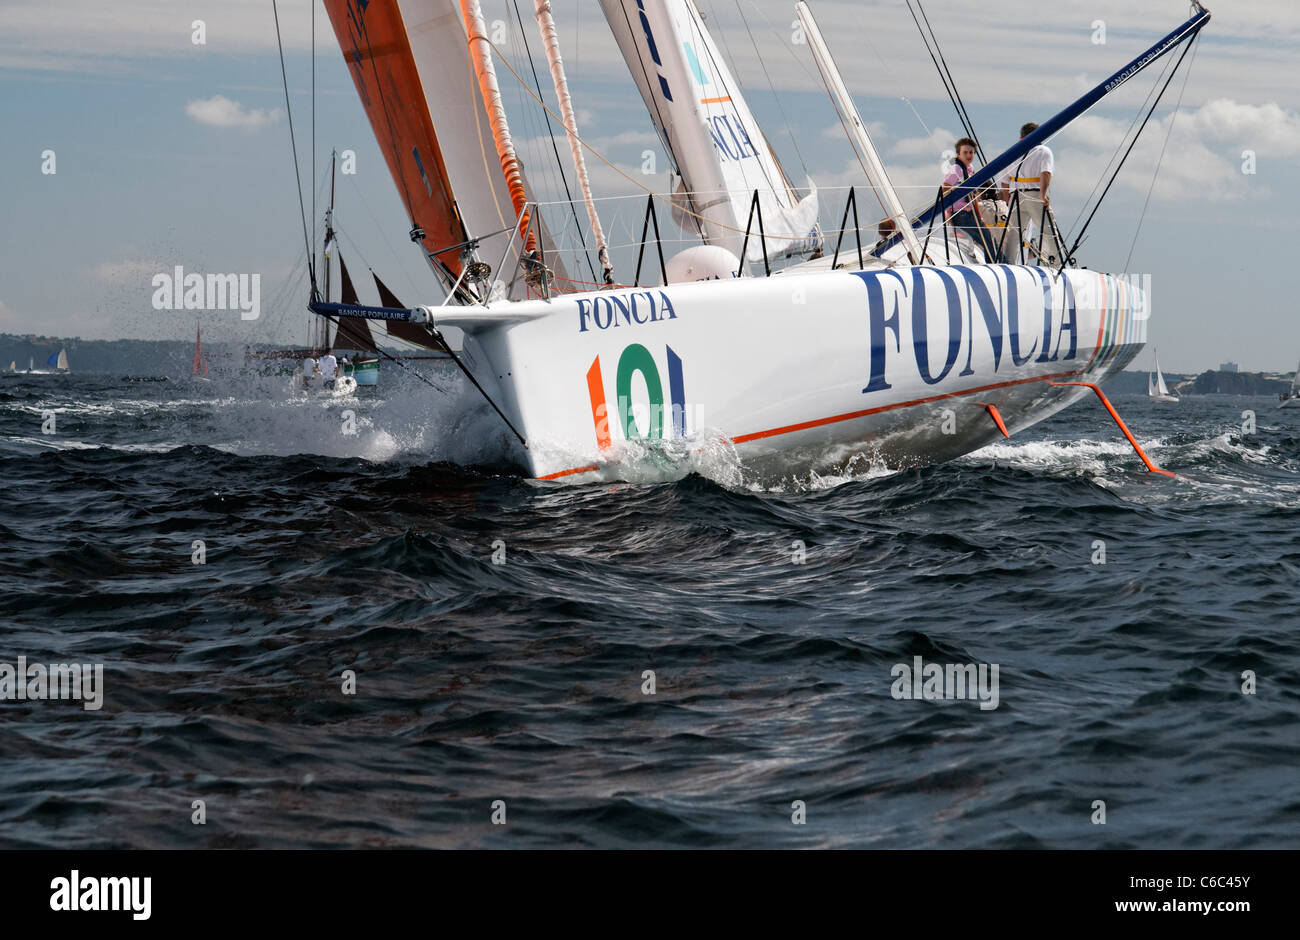 Foncia : Class 60 IMOCA, mono hull, Michel Desjoyeaux won the 2008-2009 Vendée Globe with this racing boat. Brest, France Stock Photo